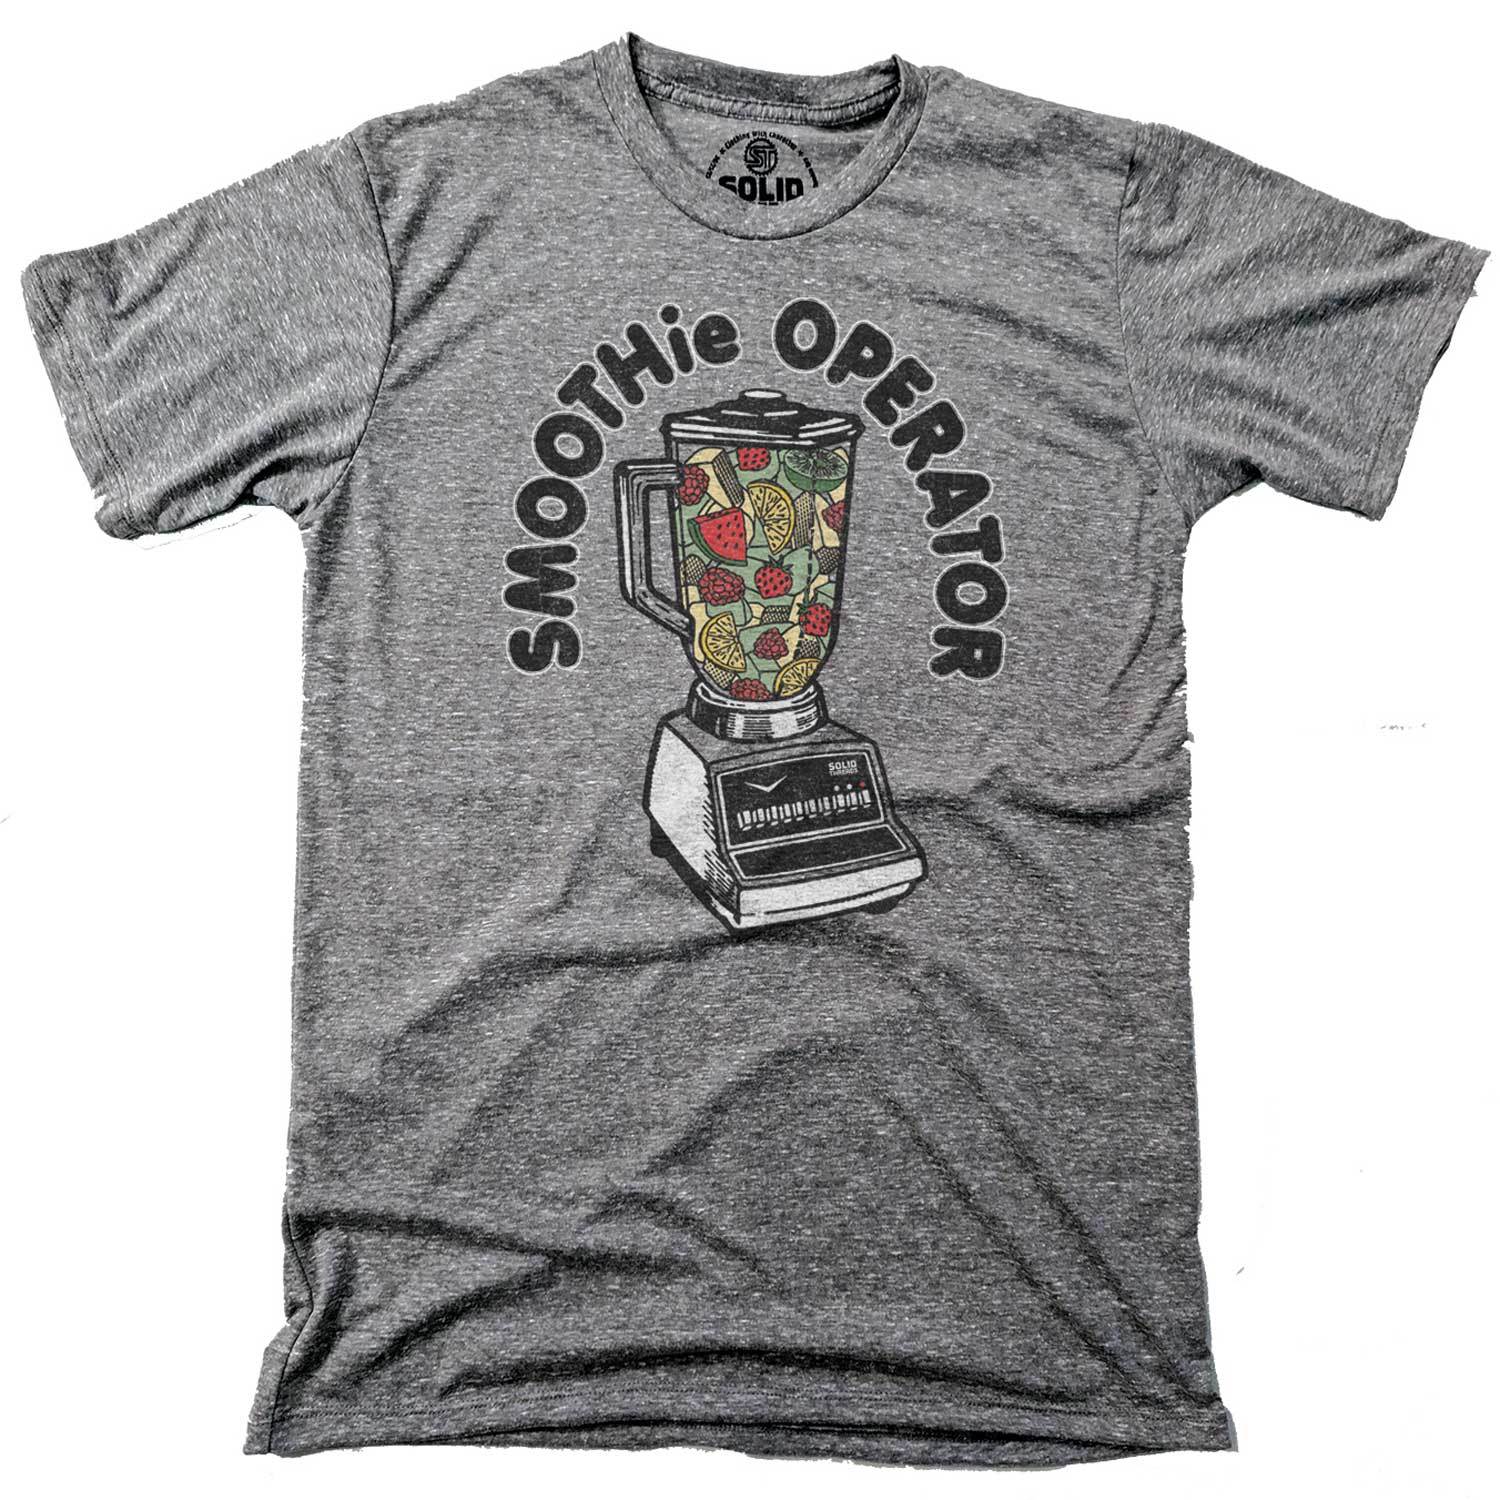 Men's Smoothie Operator Vintage Inspired T-Shirt | Funny Health Food Graphic Tee | Solid Threads